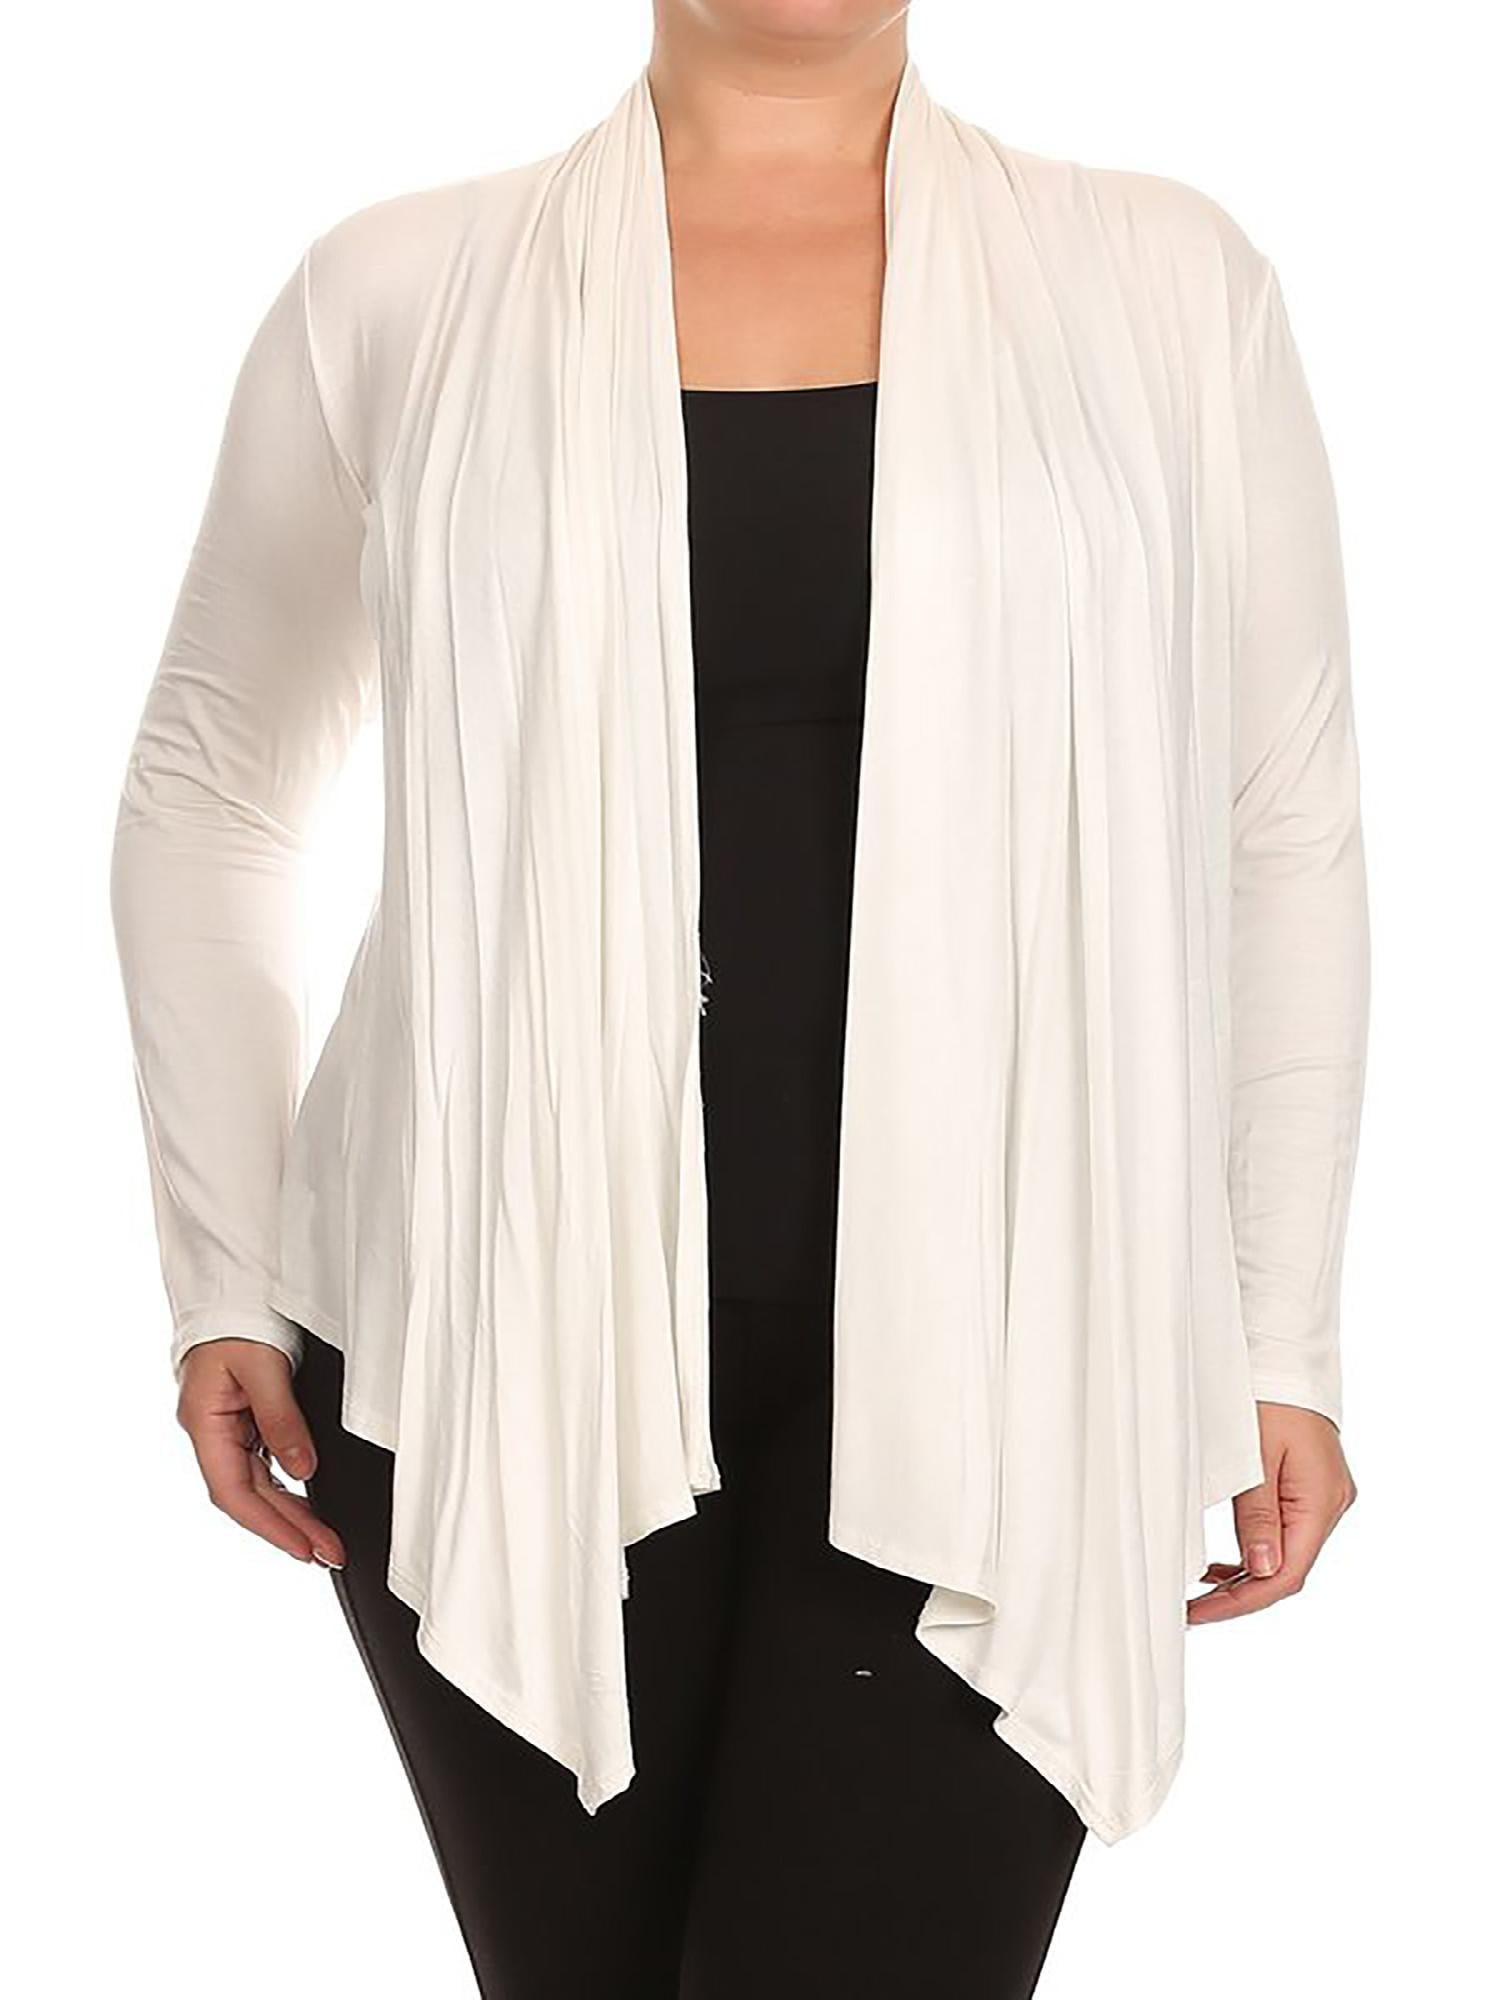 Hooded Open Drape Front Long Sleeve Cardigan/Cover-Up Plus Tunic Top 